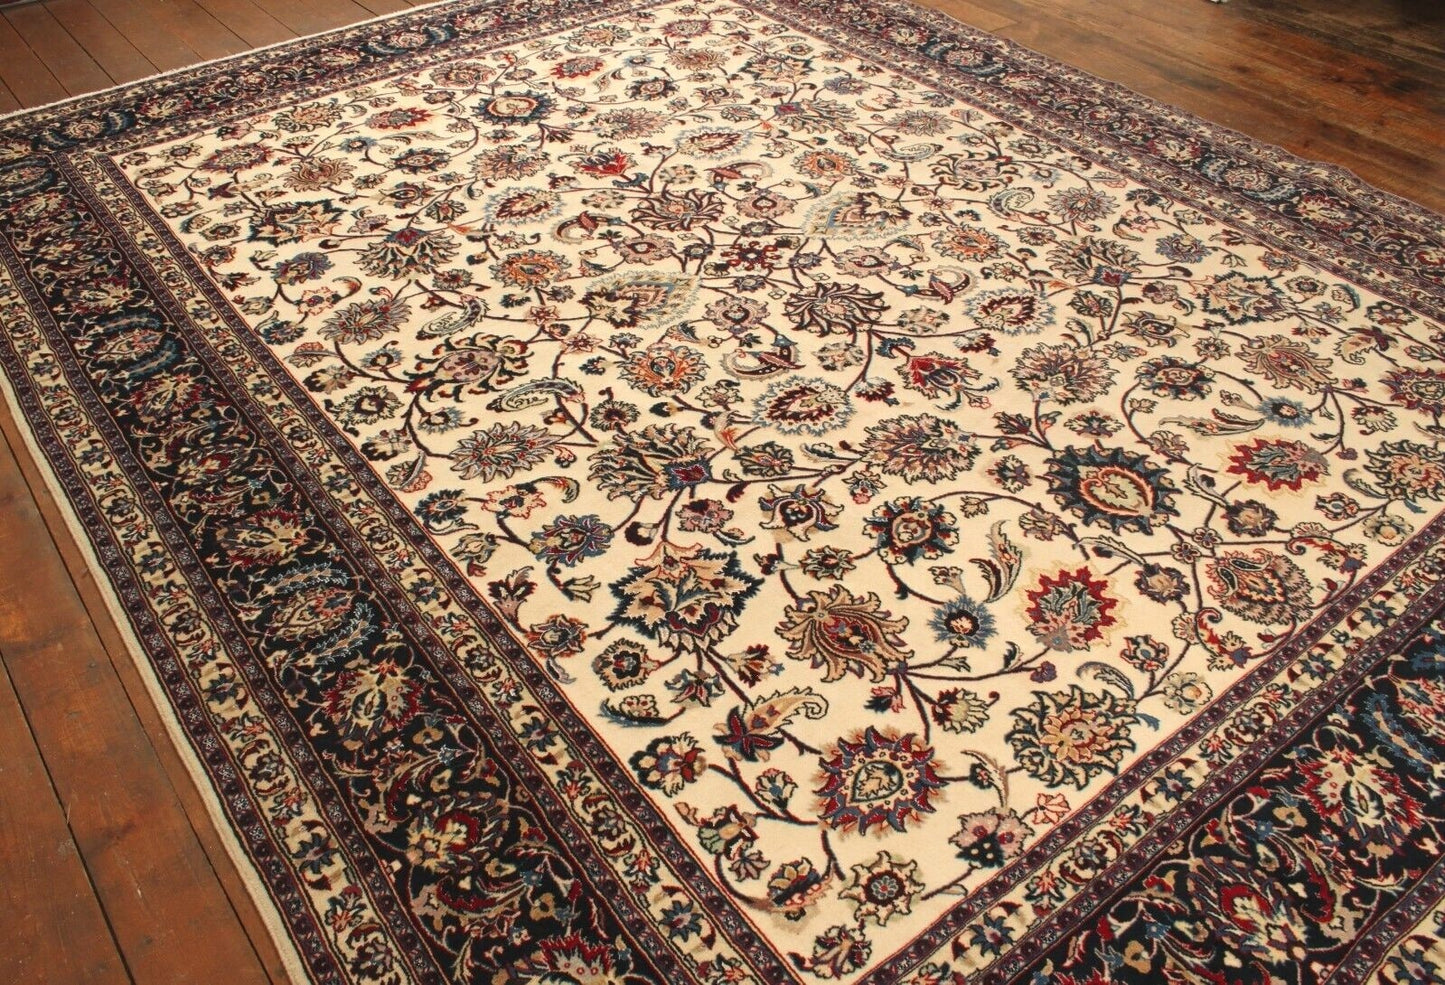 Front view of the Handmade Contemporary Persian Style Tabriz Rug highlighting design elements